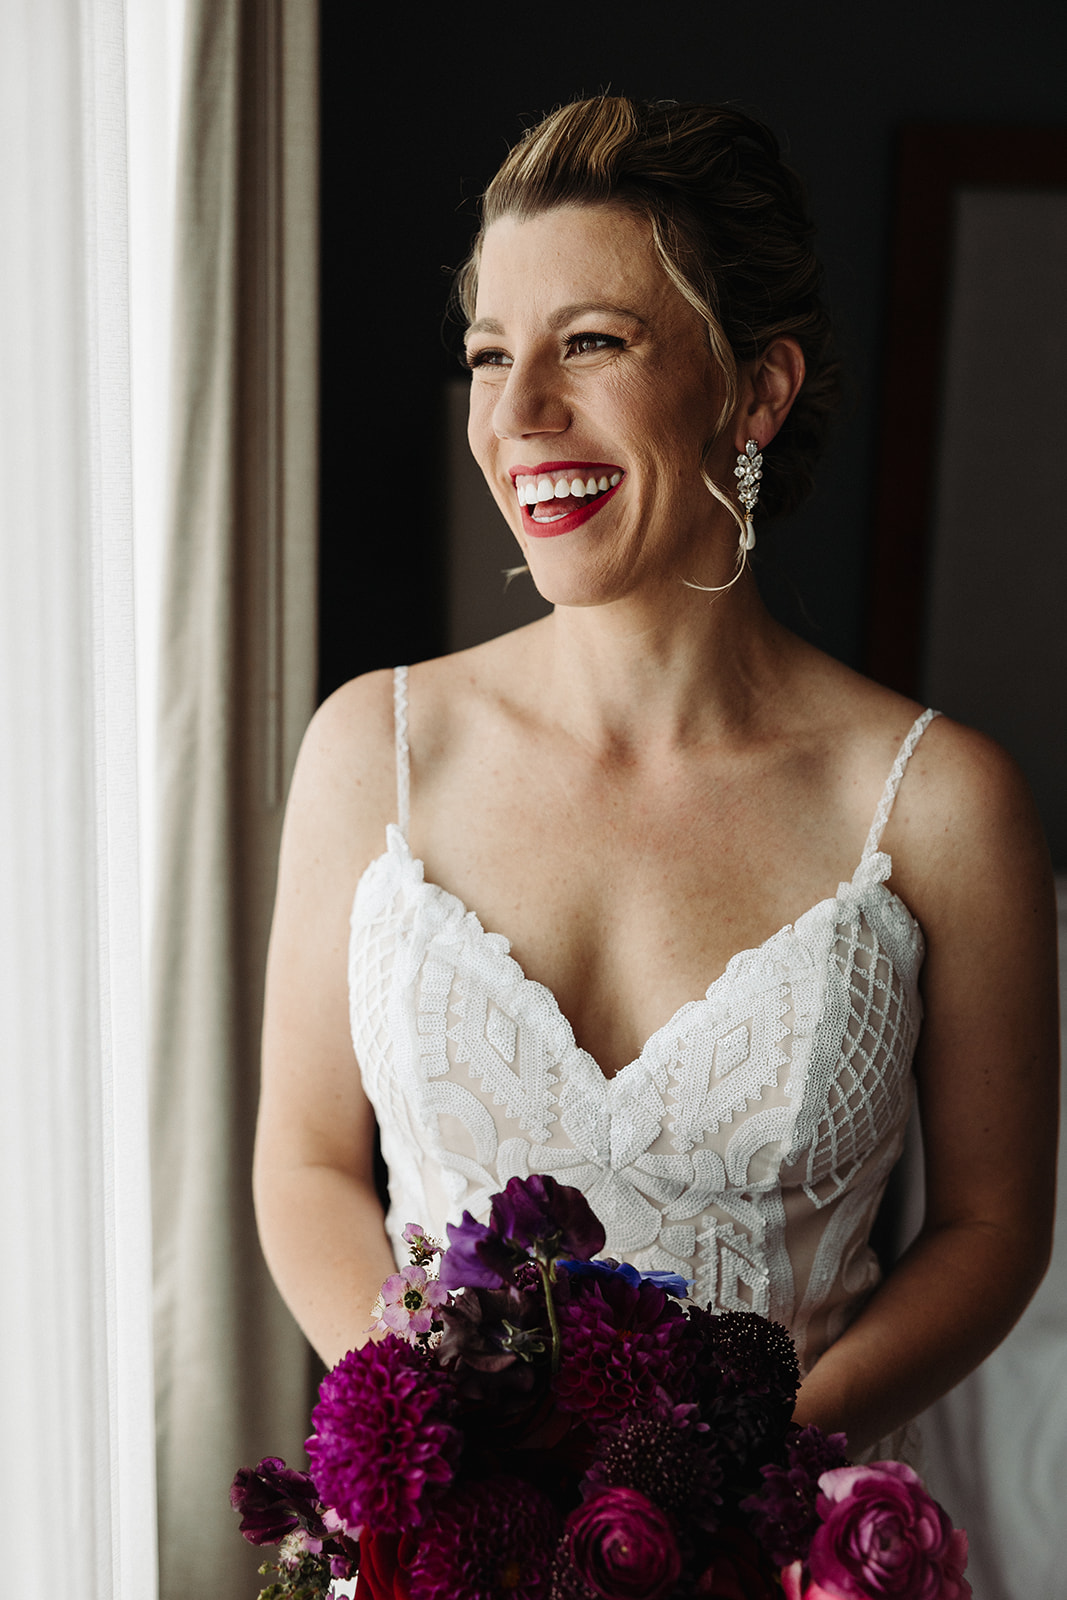 A beaming bride smiles widely as she holds her vibrant purple bouquet in the natural window lighting.